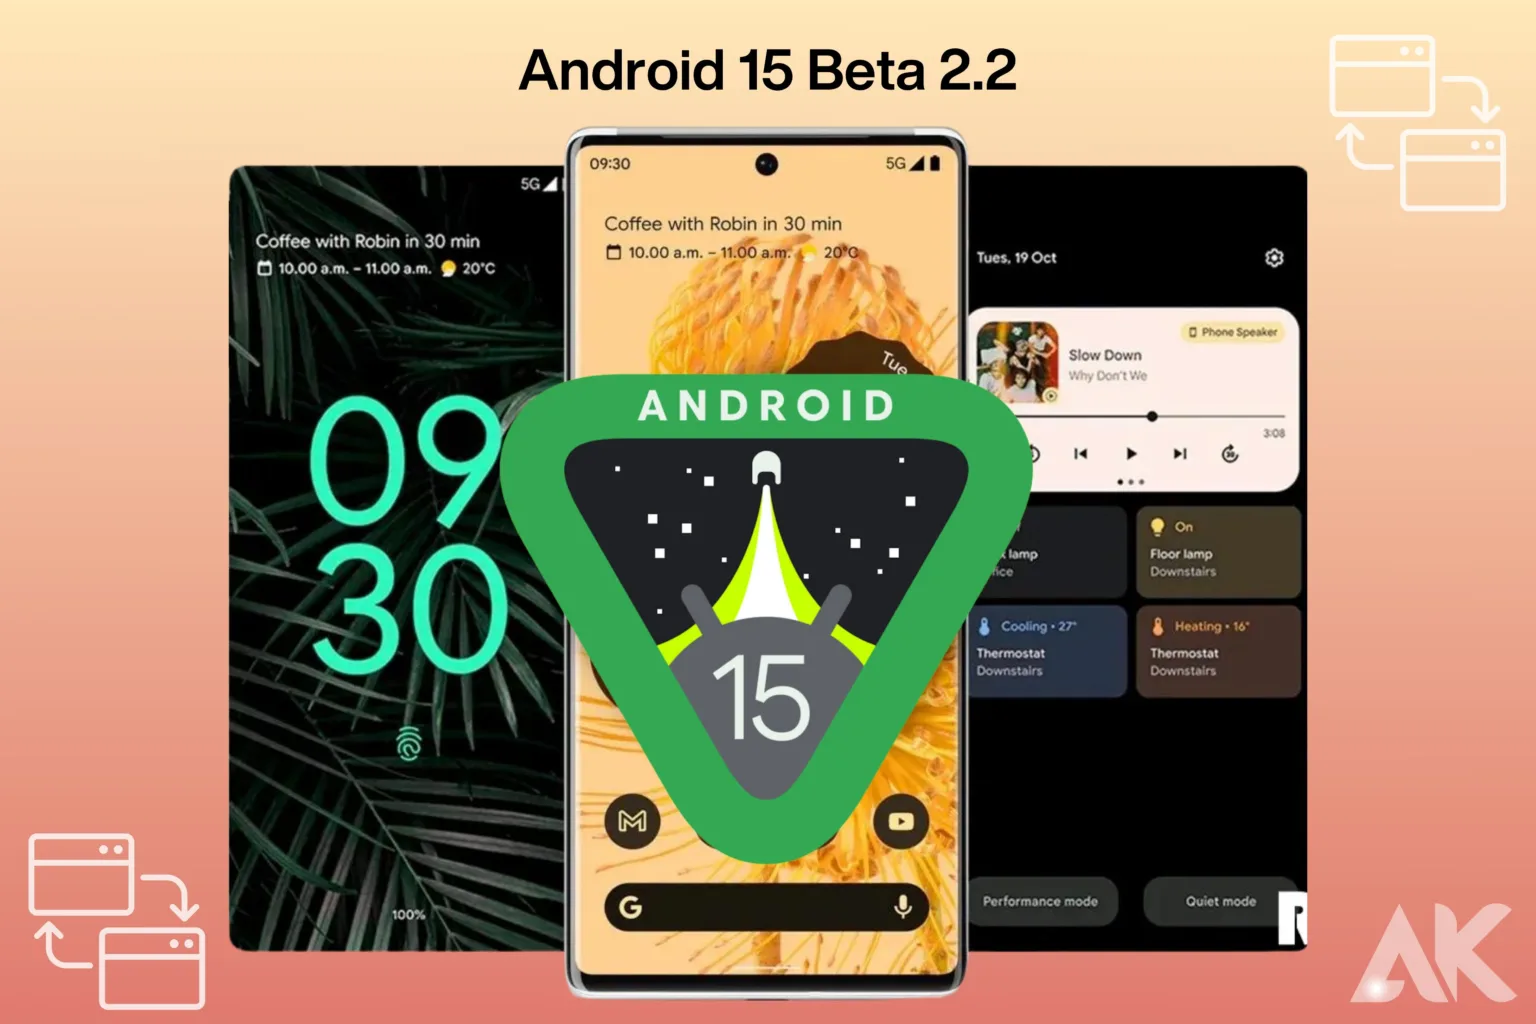 Android 15 Beta 2.2 compatible devices